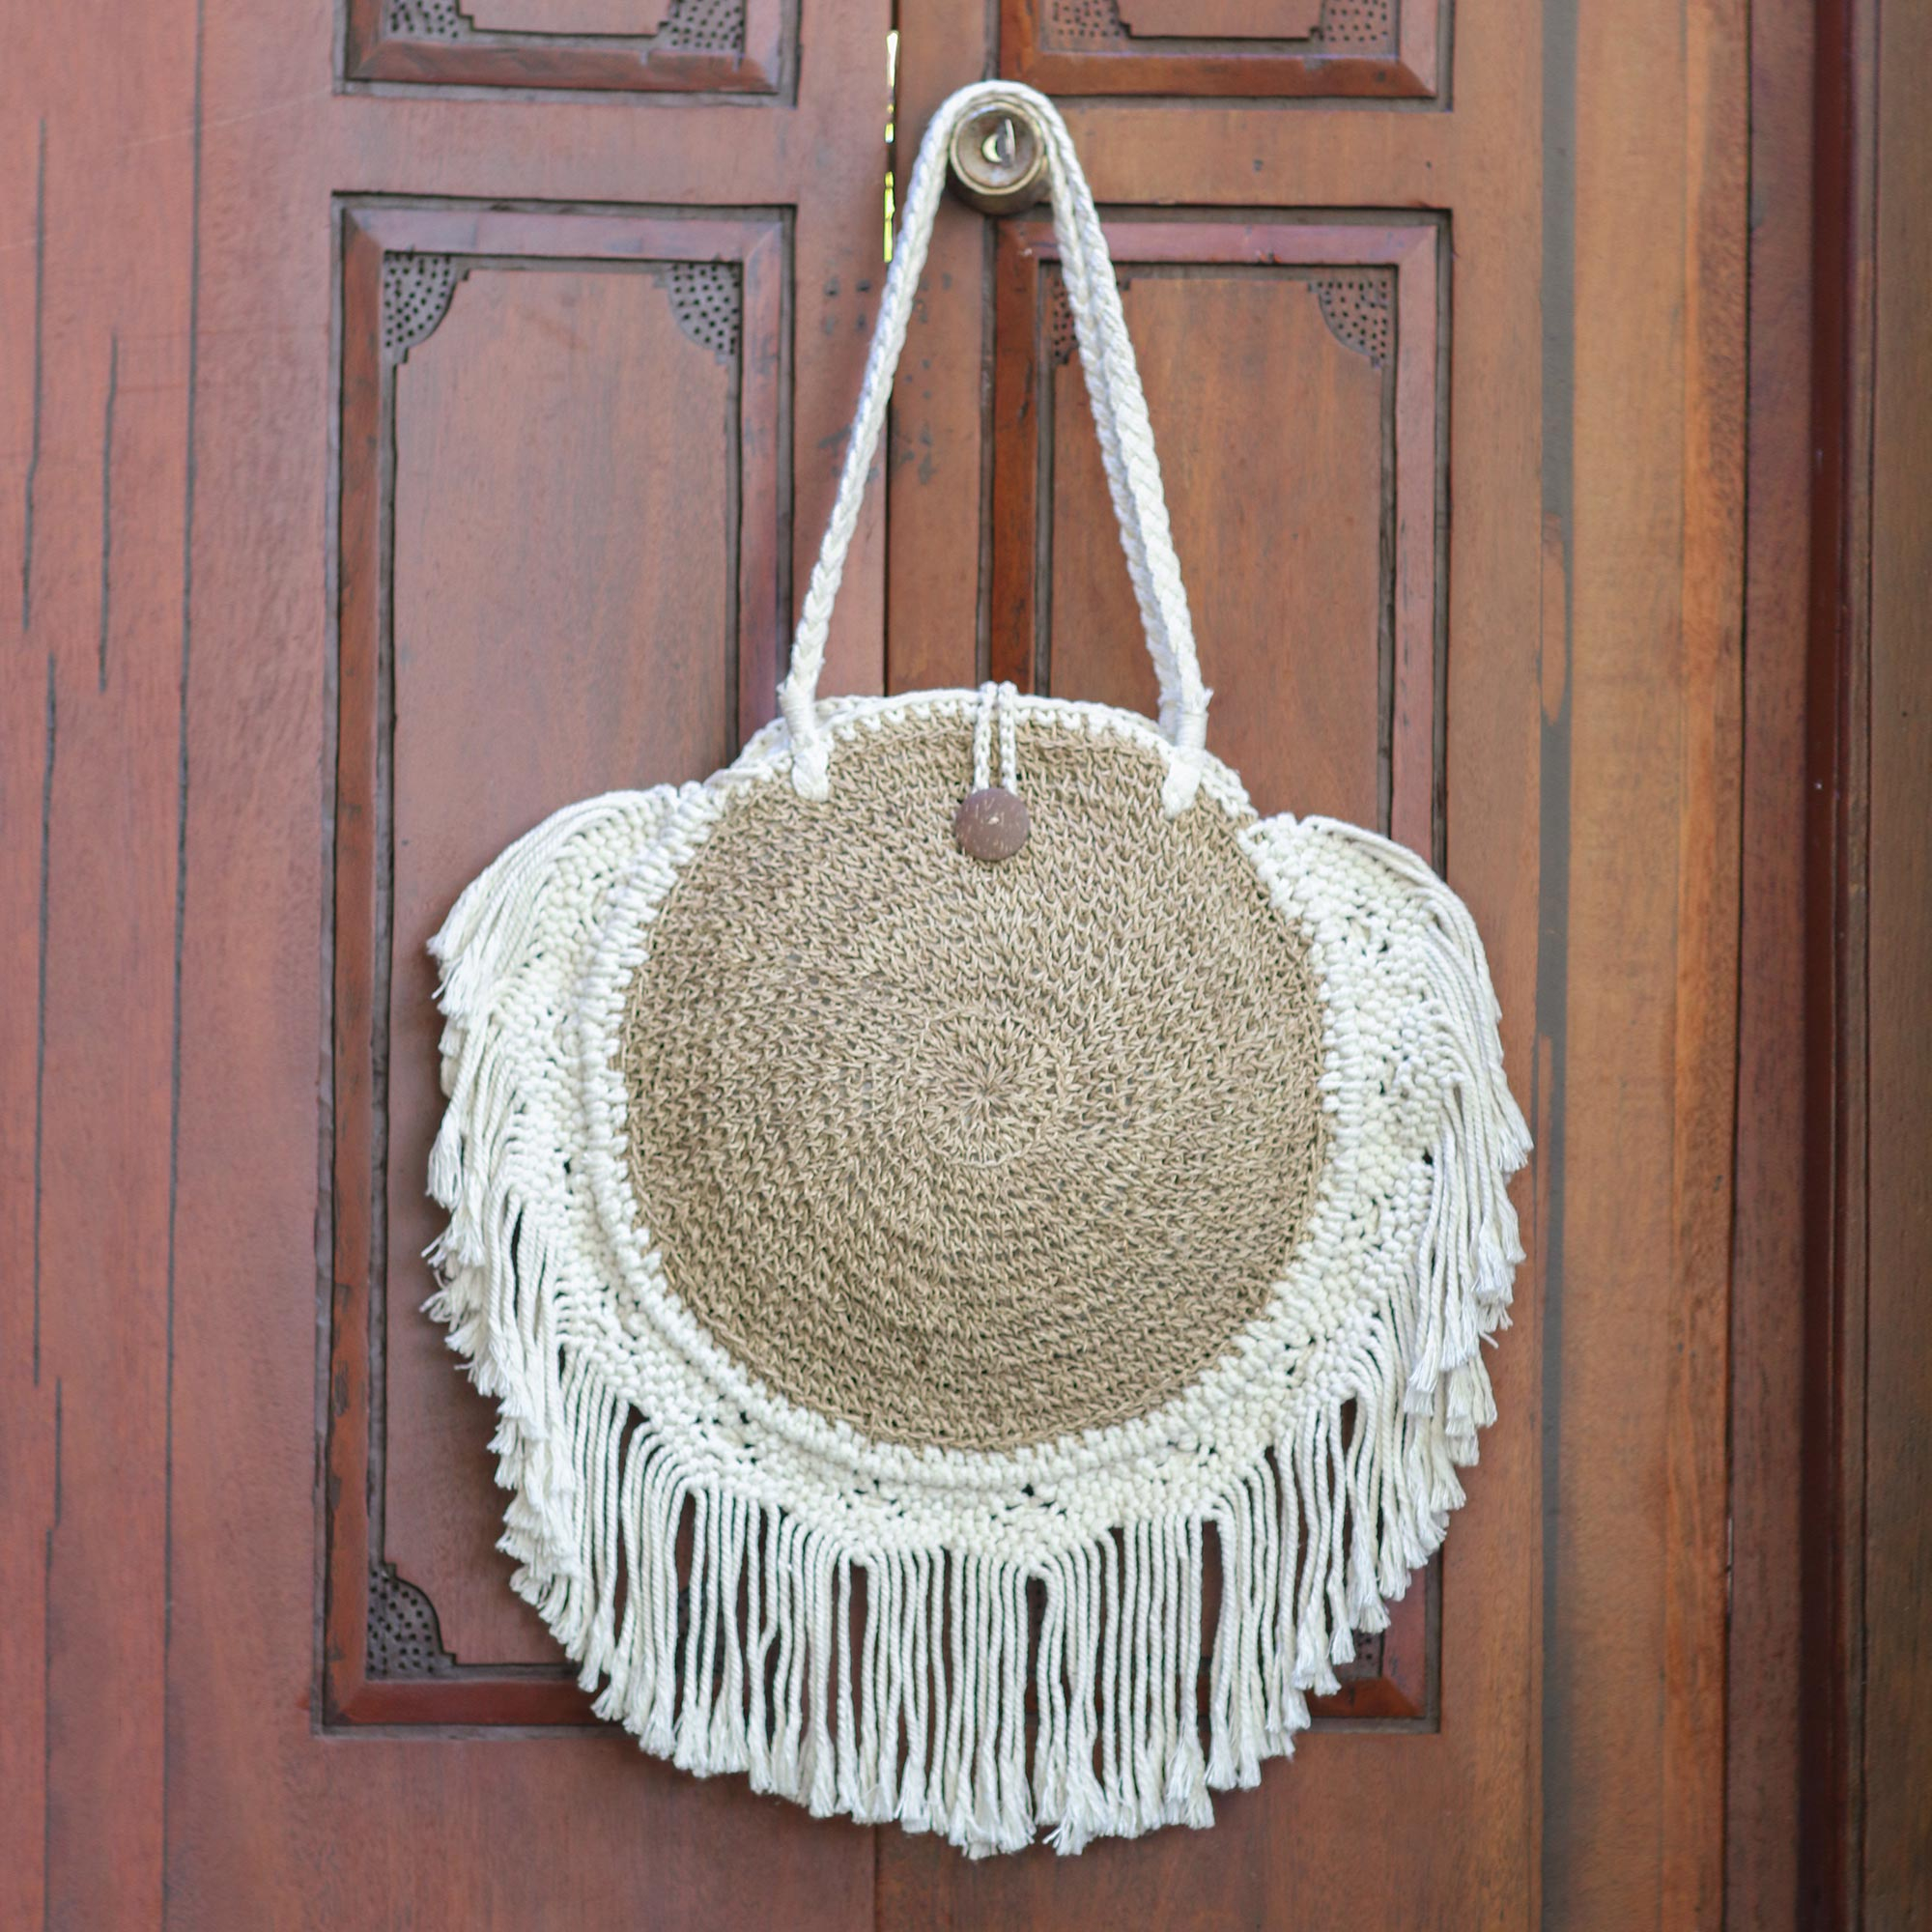 Handmade White Crochet Bag With Fringes And Bamboo Handles